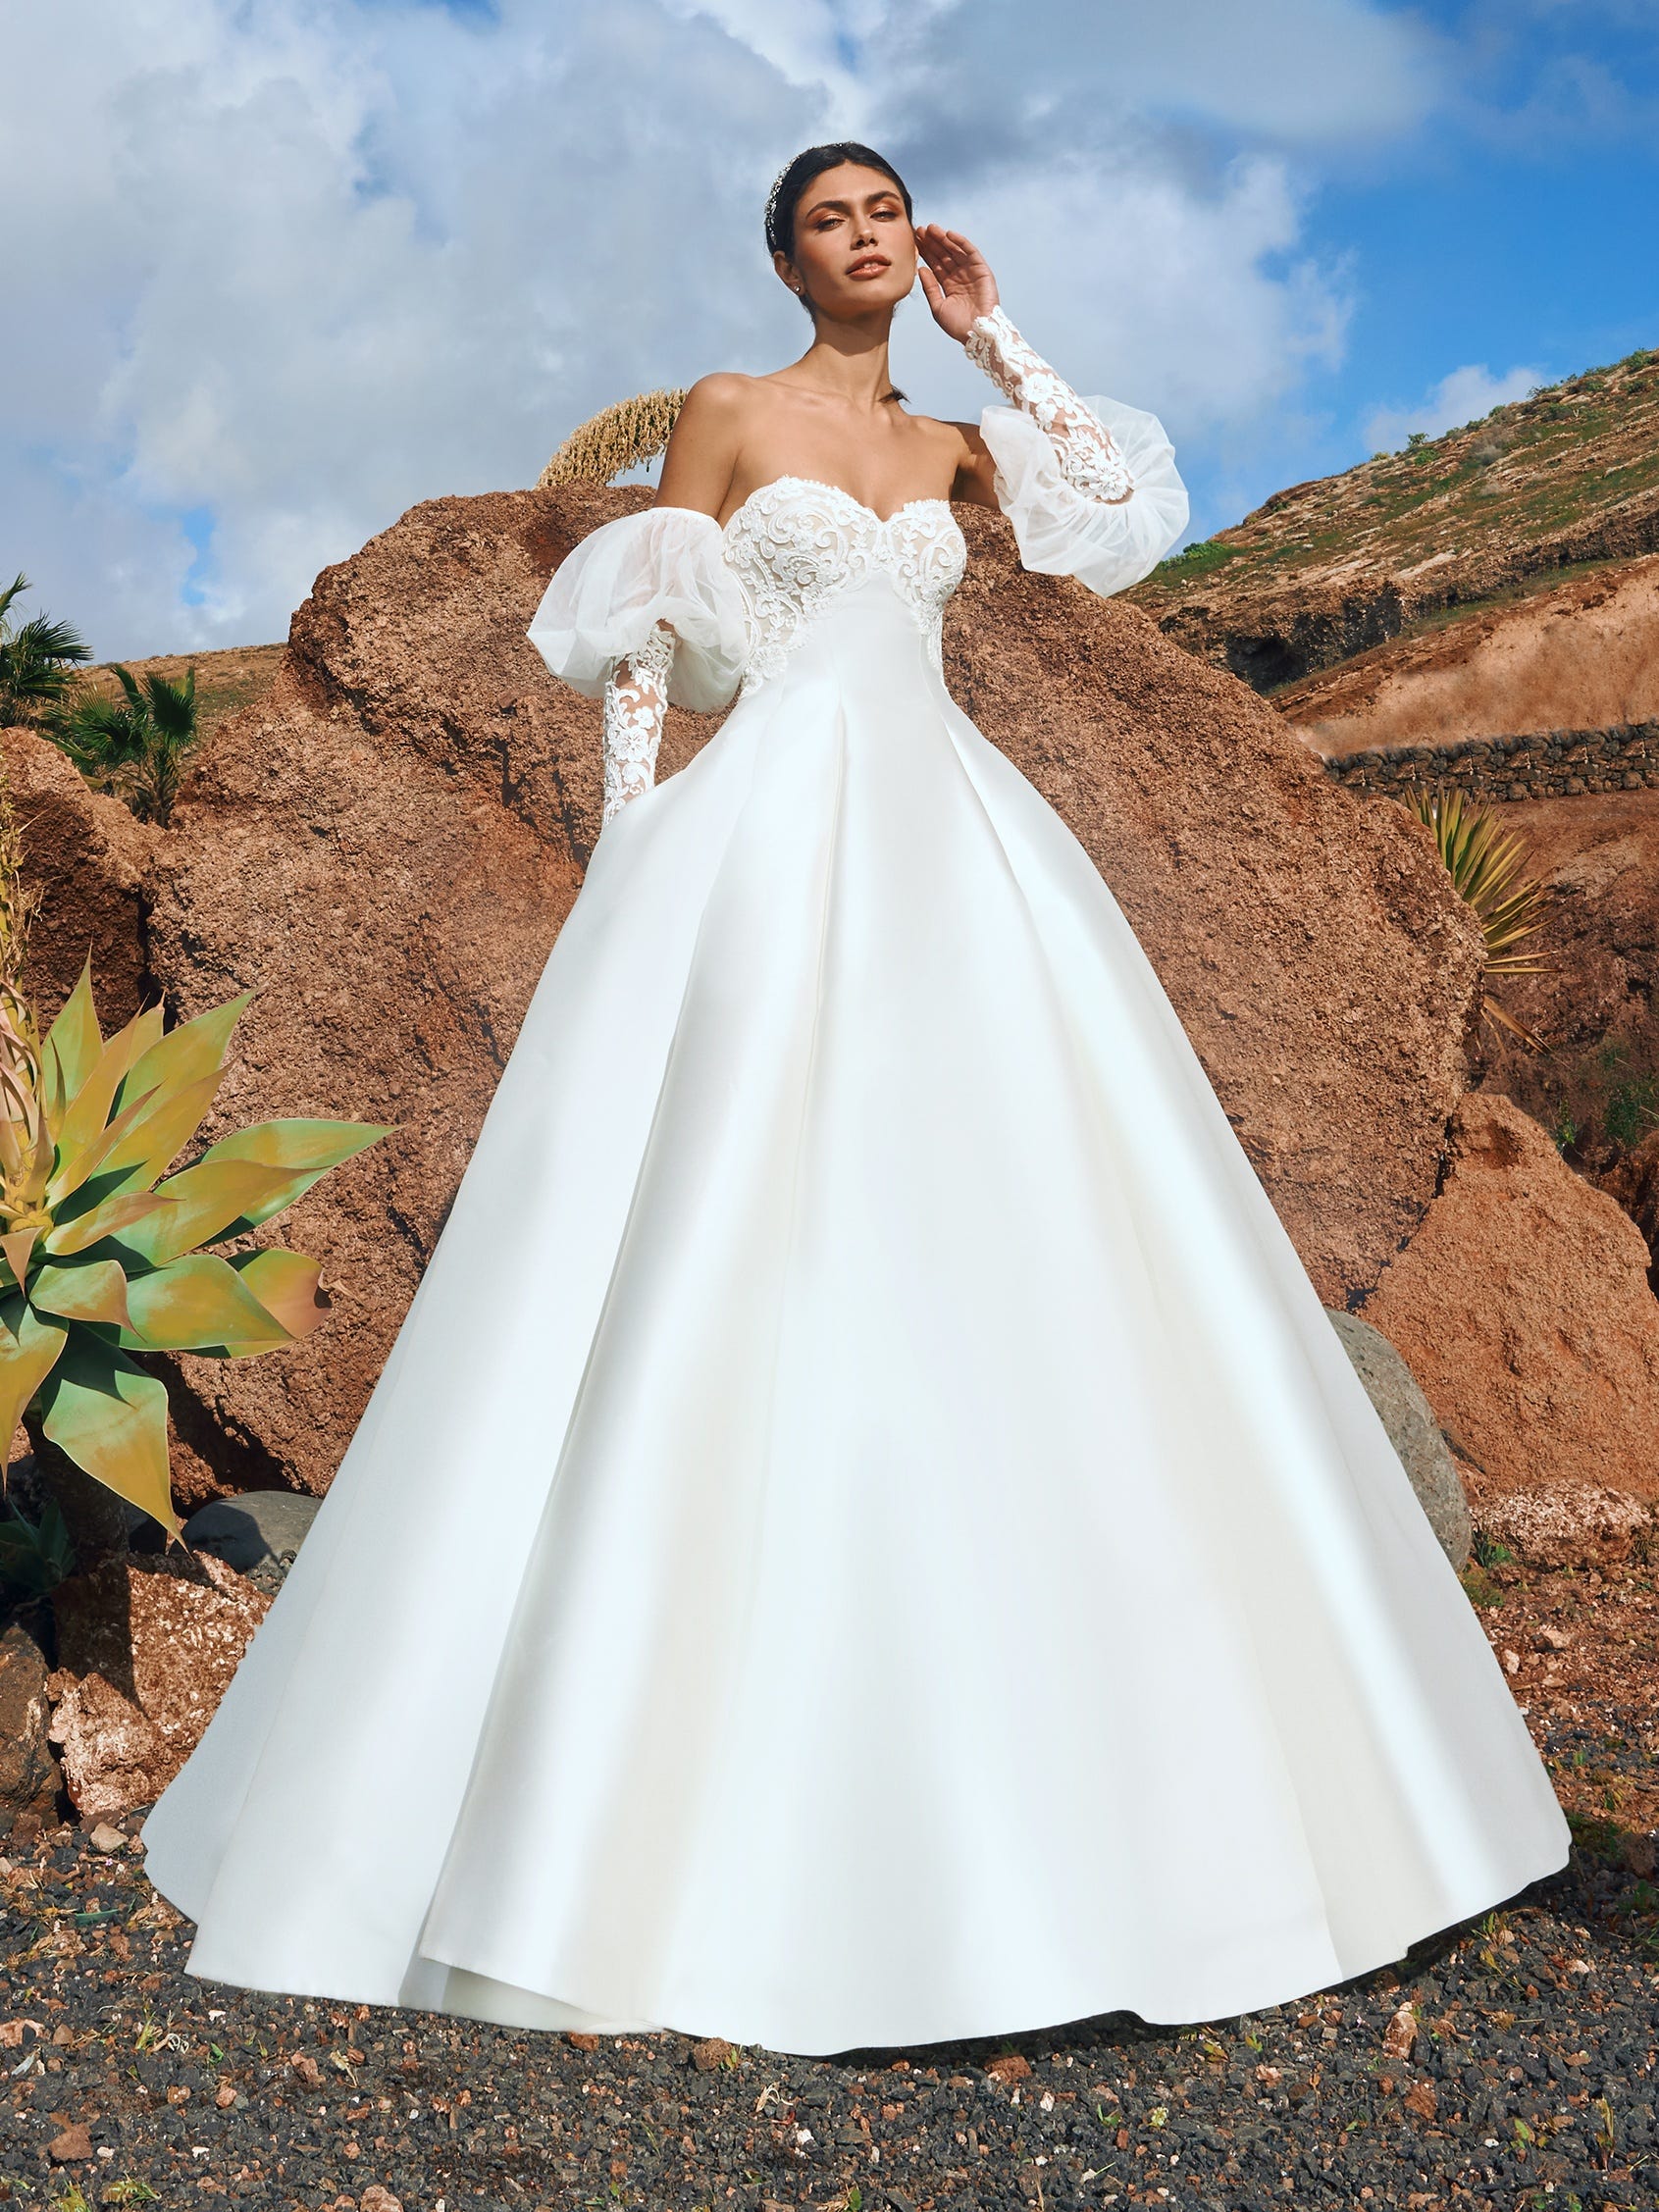 Eco-friendly Wedding Gowns – A Fashion Trend for 2013 -